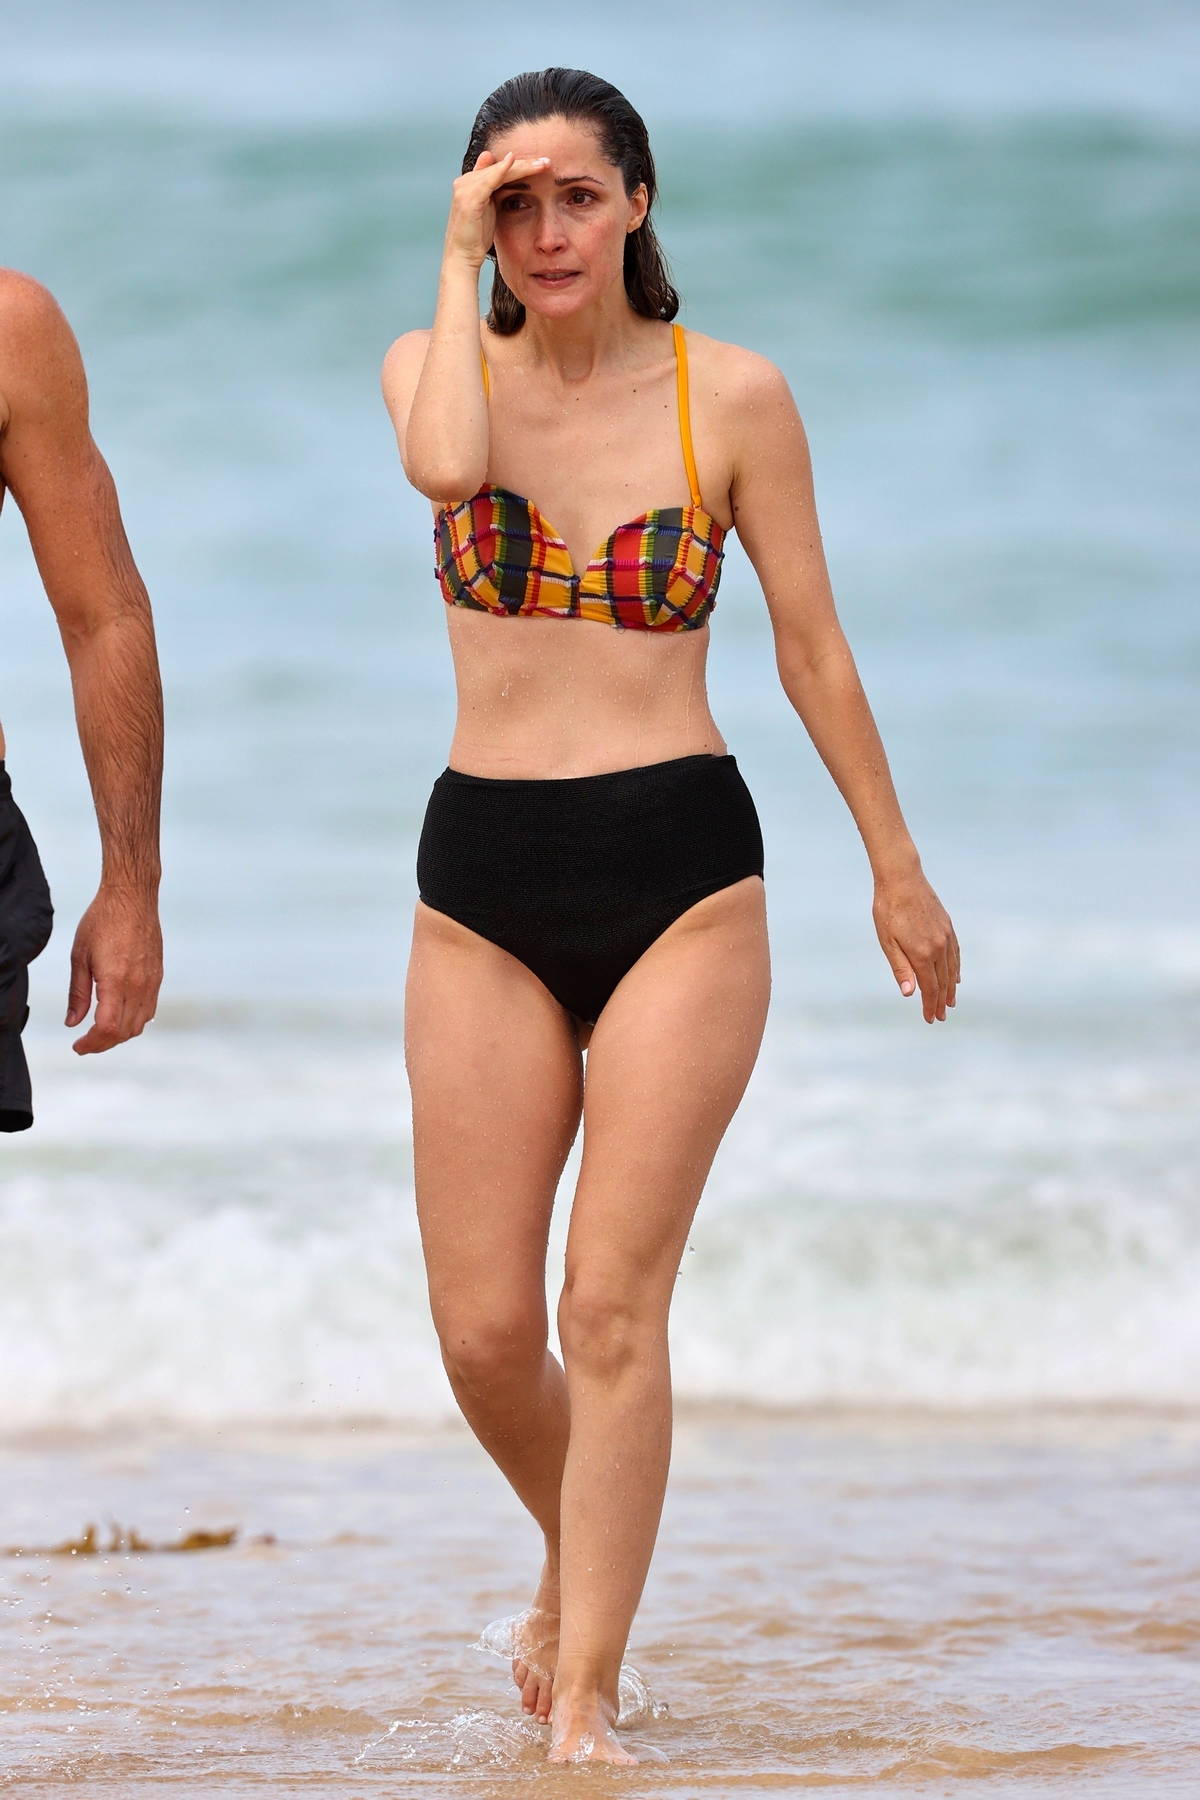 Rose Byrne shows off her bikini body as she goes for swim with